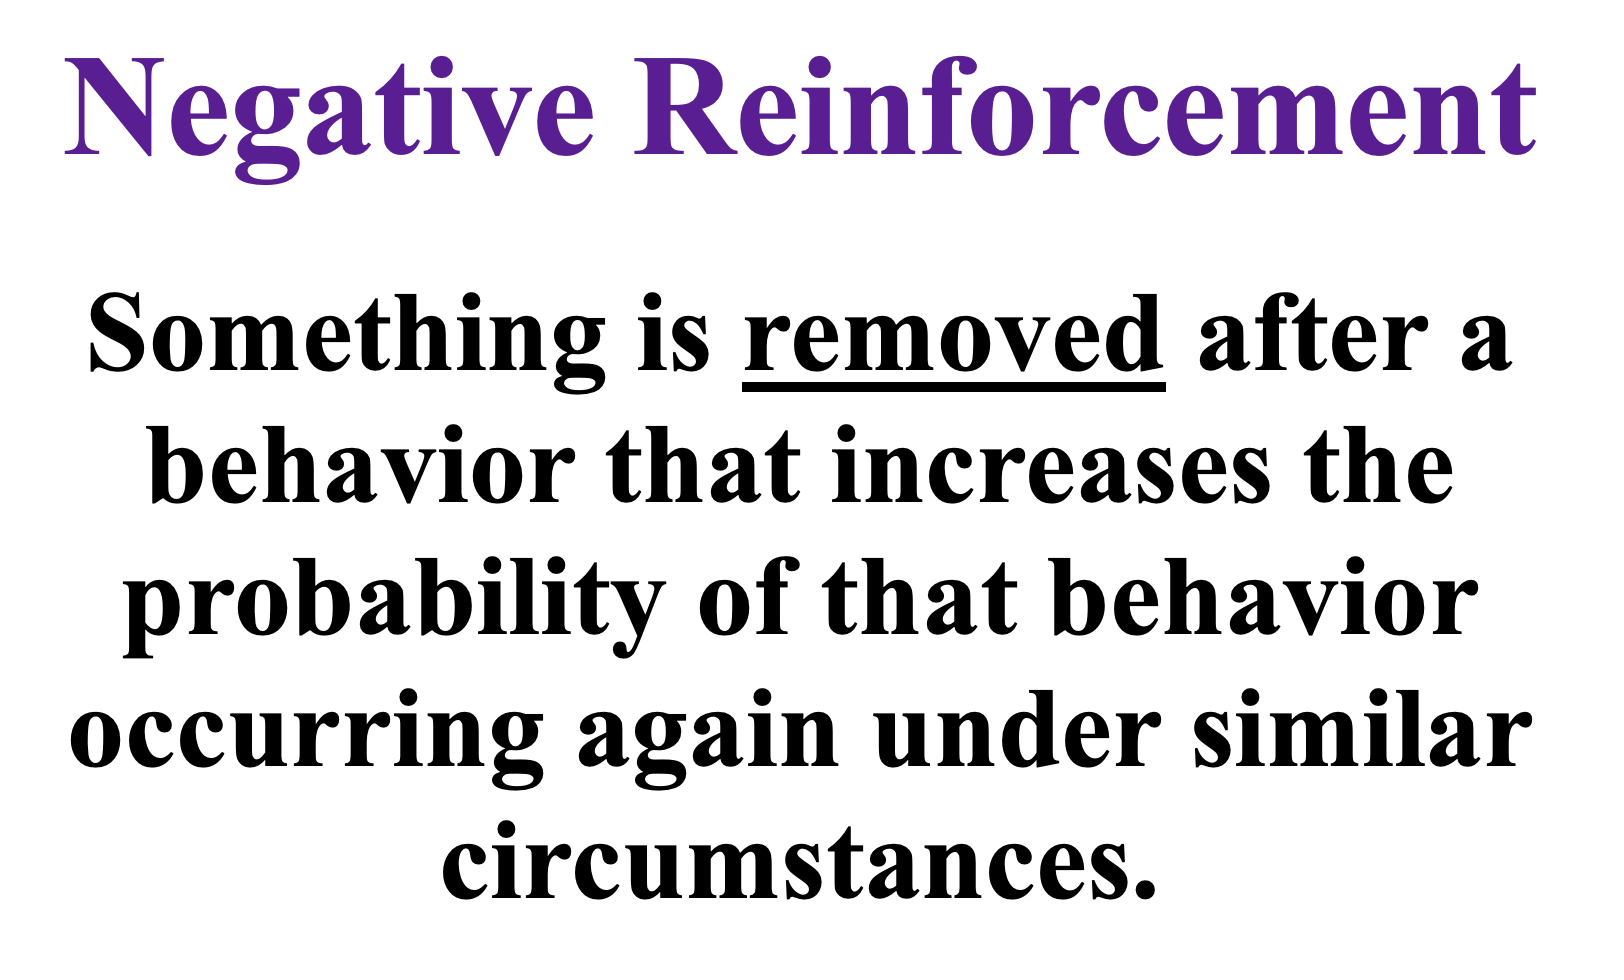 preview image of Negative_Reinforcement.docx for Negative Reinforcement